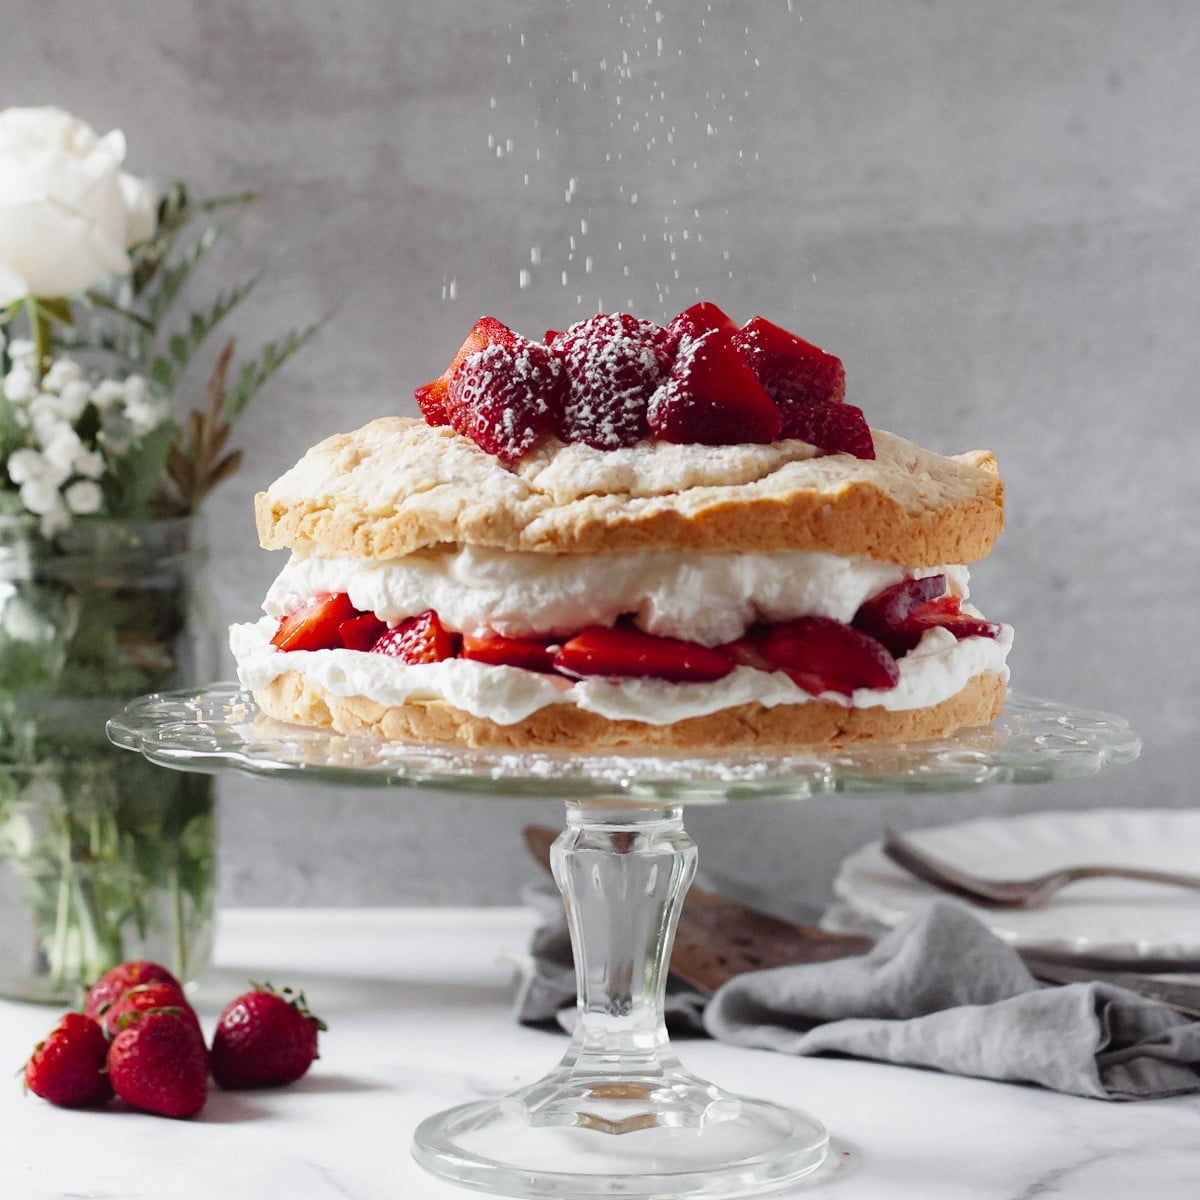 old fashioned strawberry shortcake from scratch full cake on a cake stand